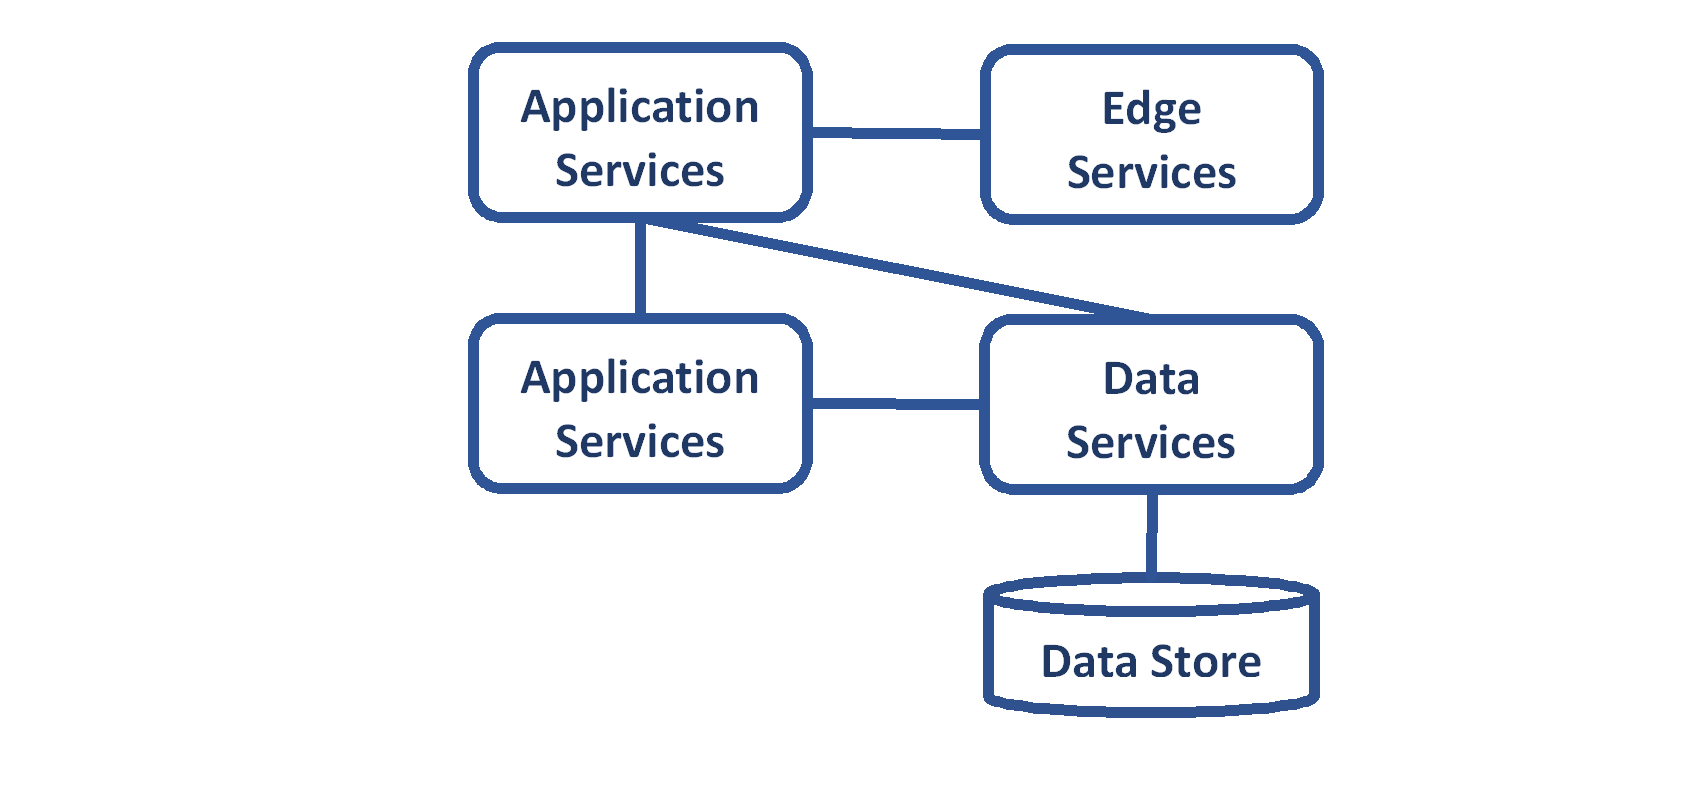 This image shows an edge service connected to an application service. The application service can connect to other application services or data services.